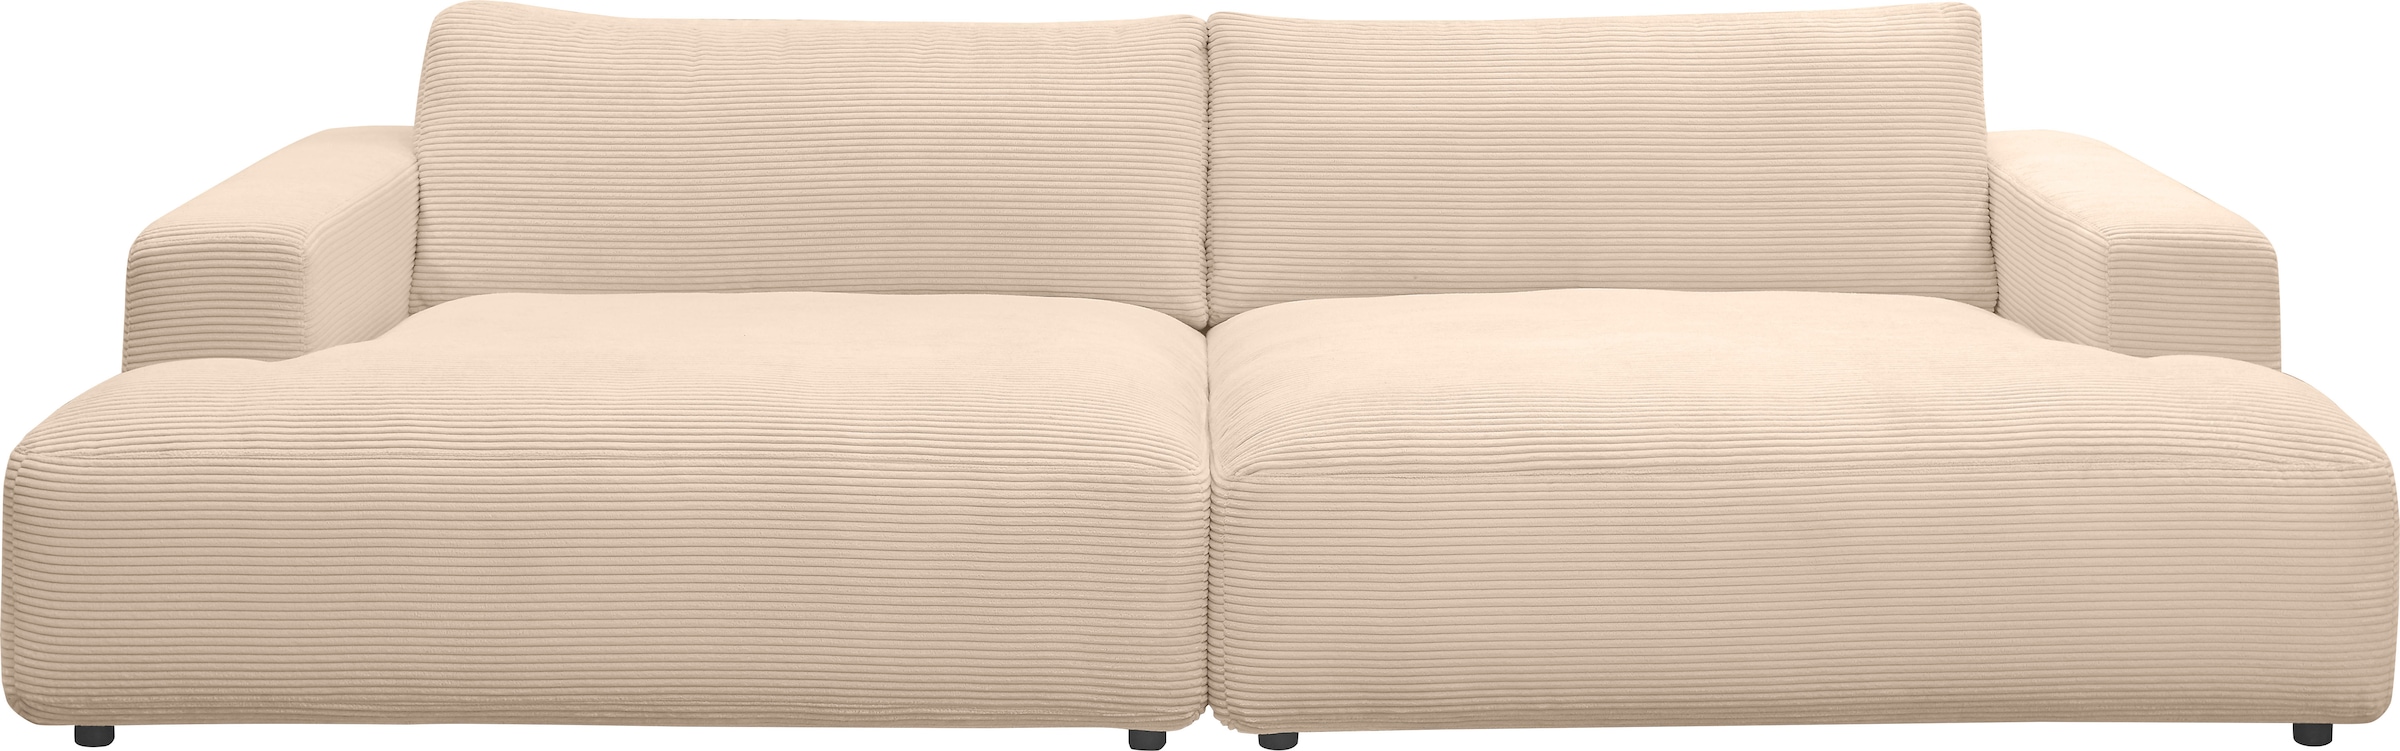 branded GALLERY M Loungesofa by Breite kaufen Cord-Bezug, Musterring bequem 292 cm »Lucia«,